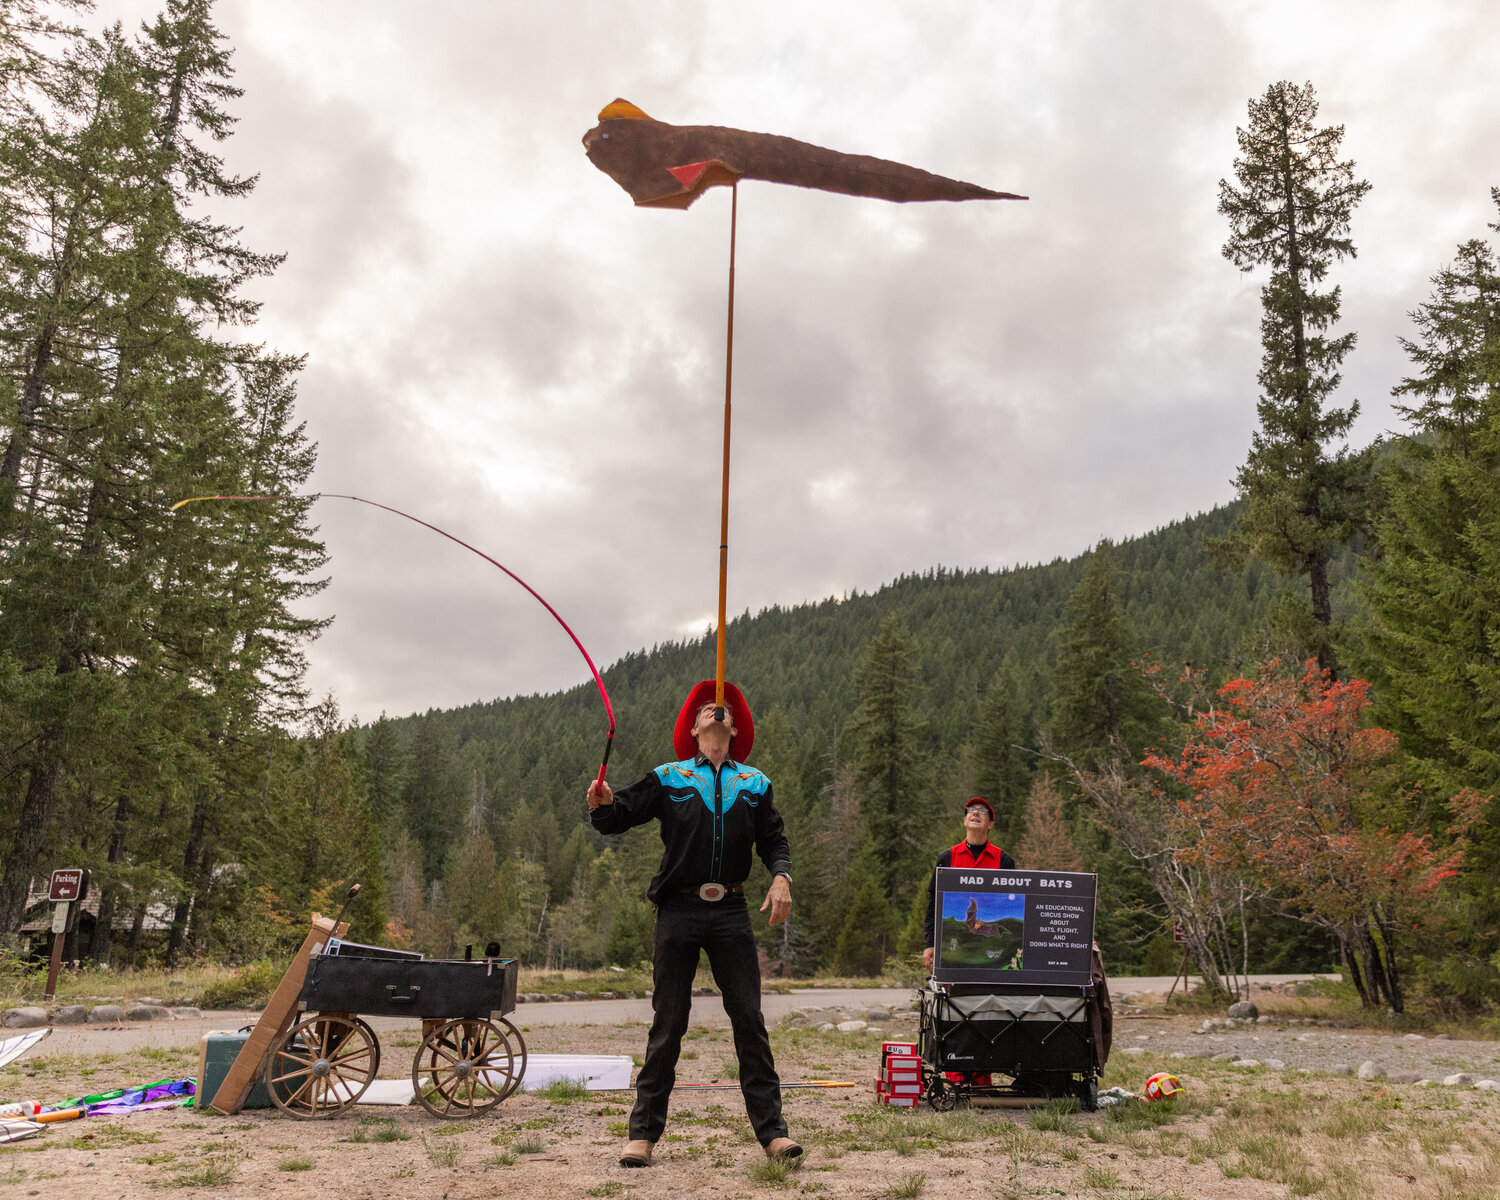 David Lichtenstein shows the size of a pterosaur, the largest flying creature to ever exist, during a Vaudeville-esque show at Mount Rainier National Park on Tuesday, Sept. 12.